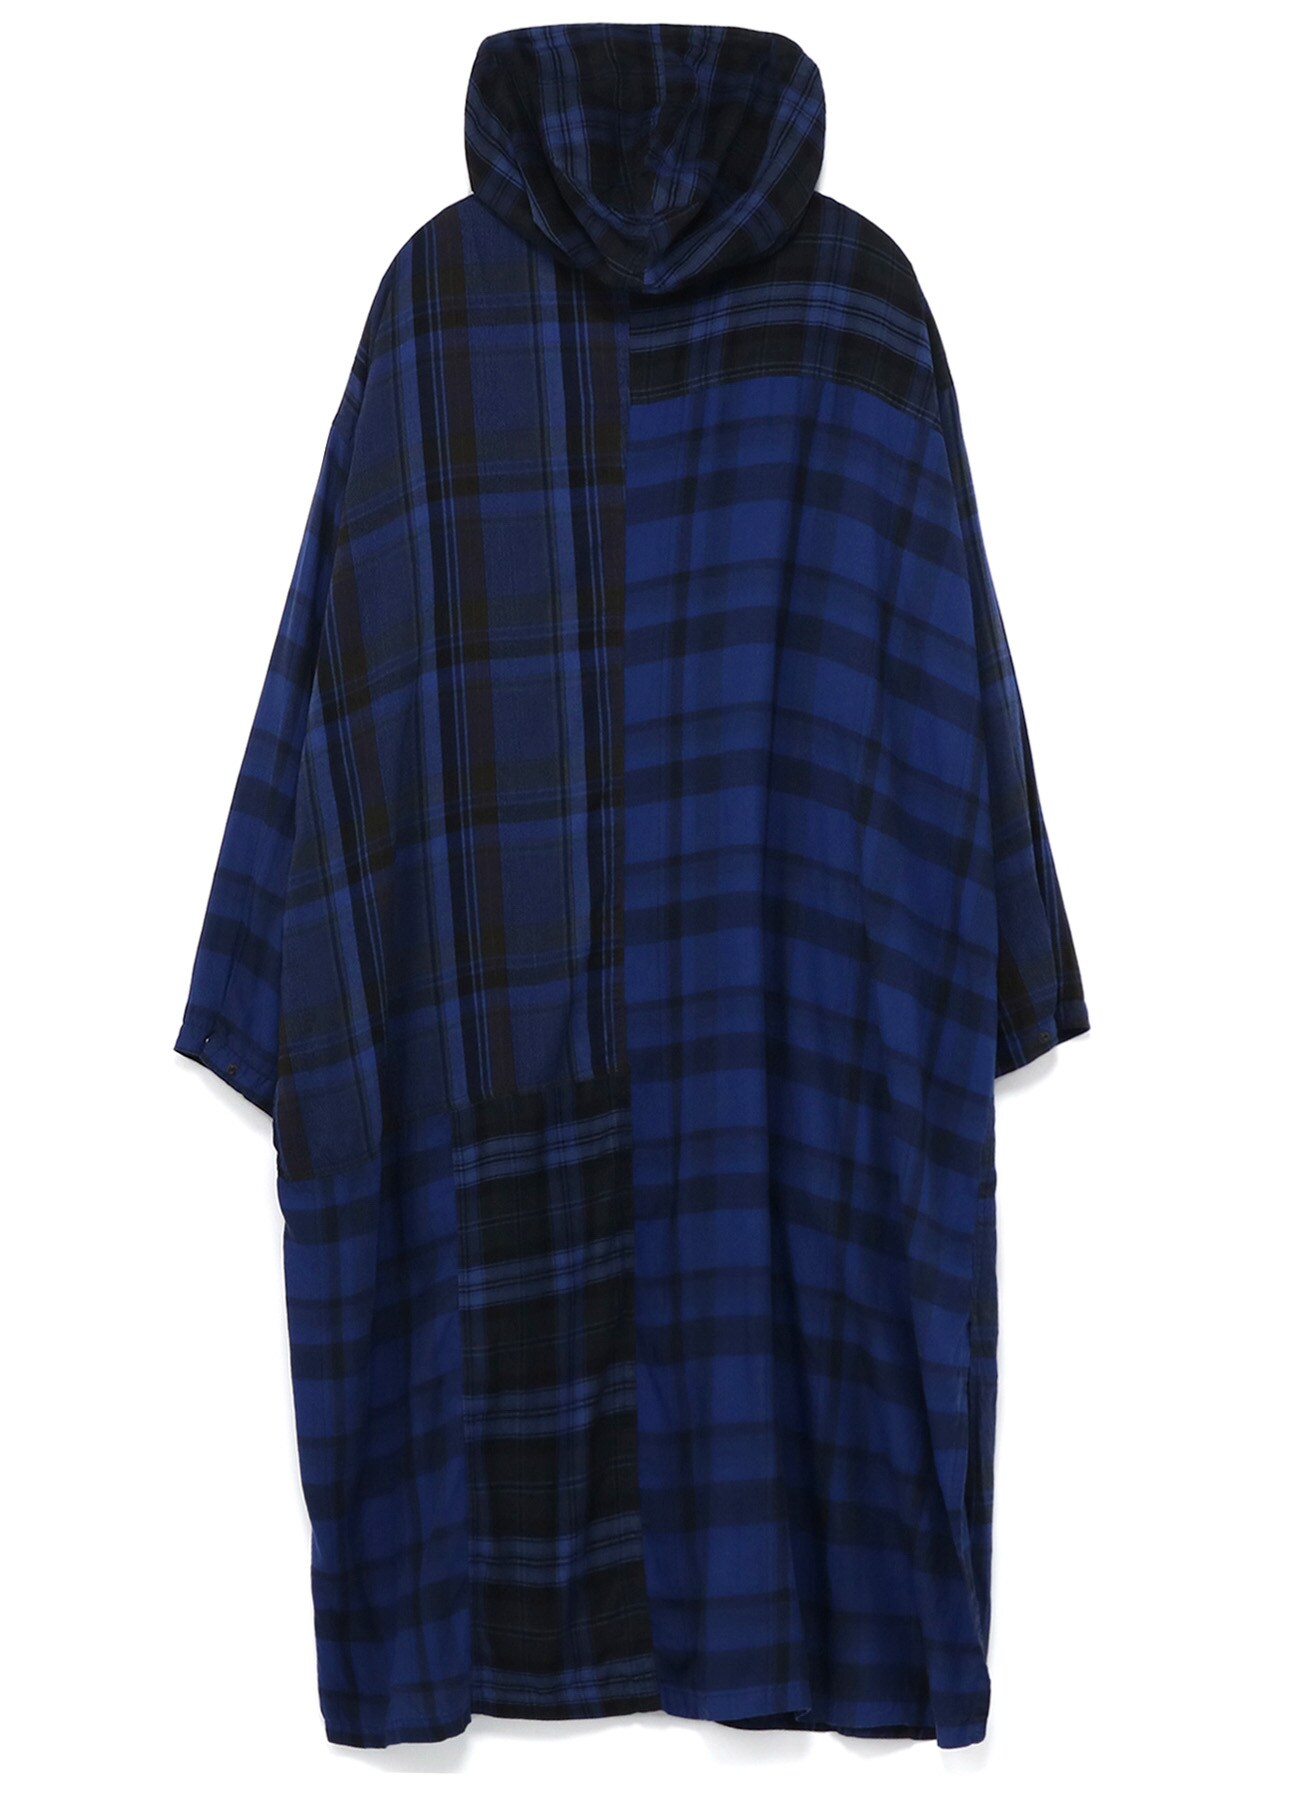 TWILL CHECKED HOODED COAT DRESS